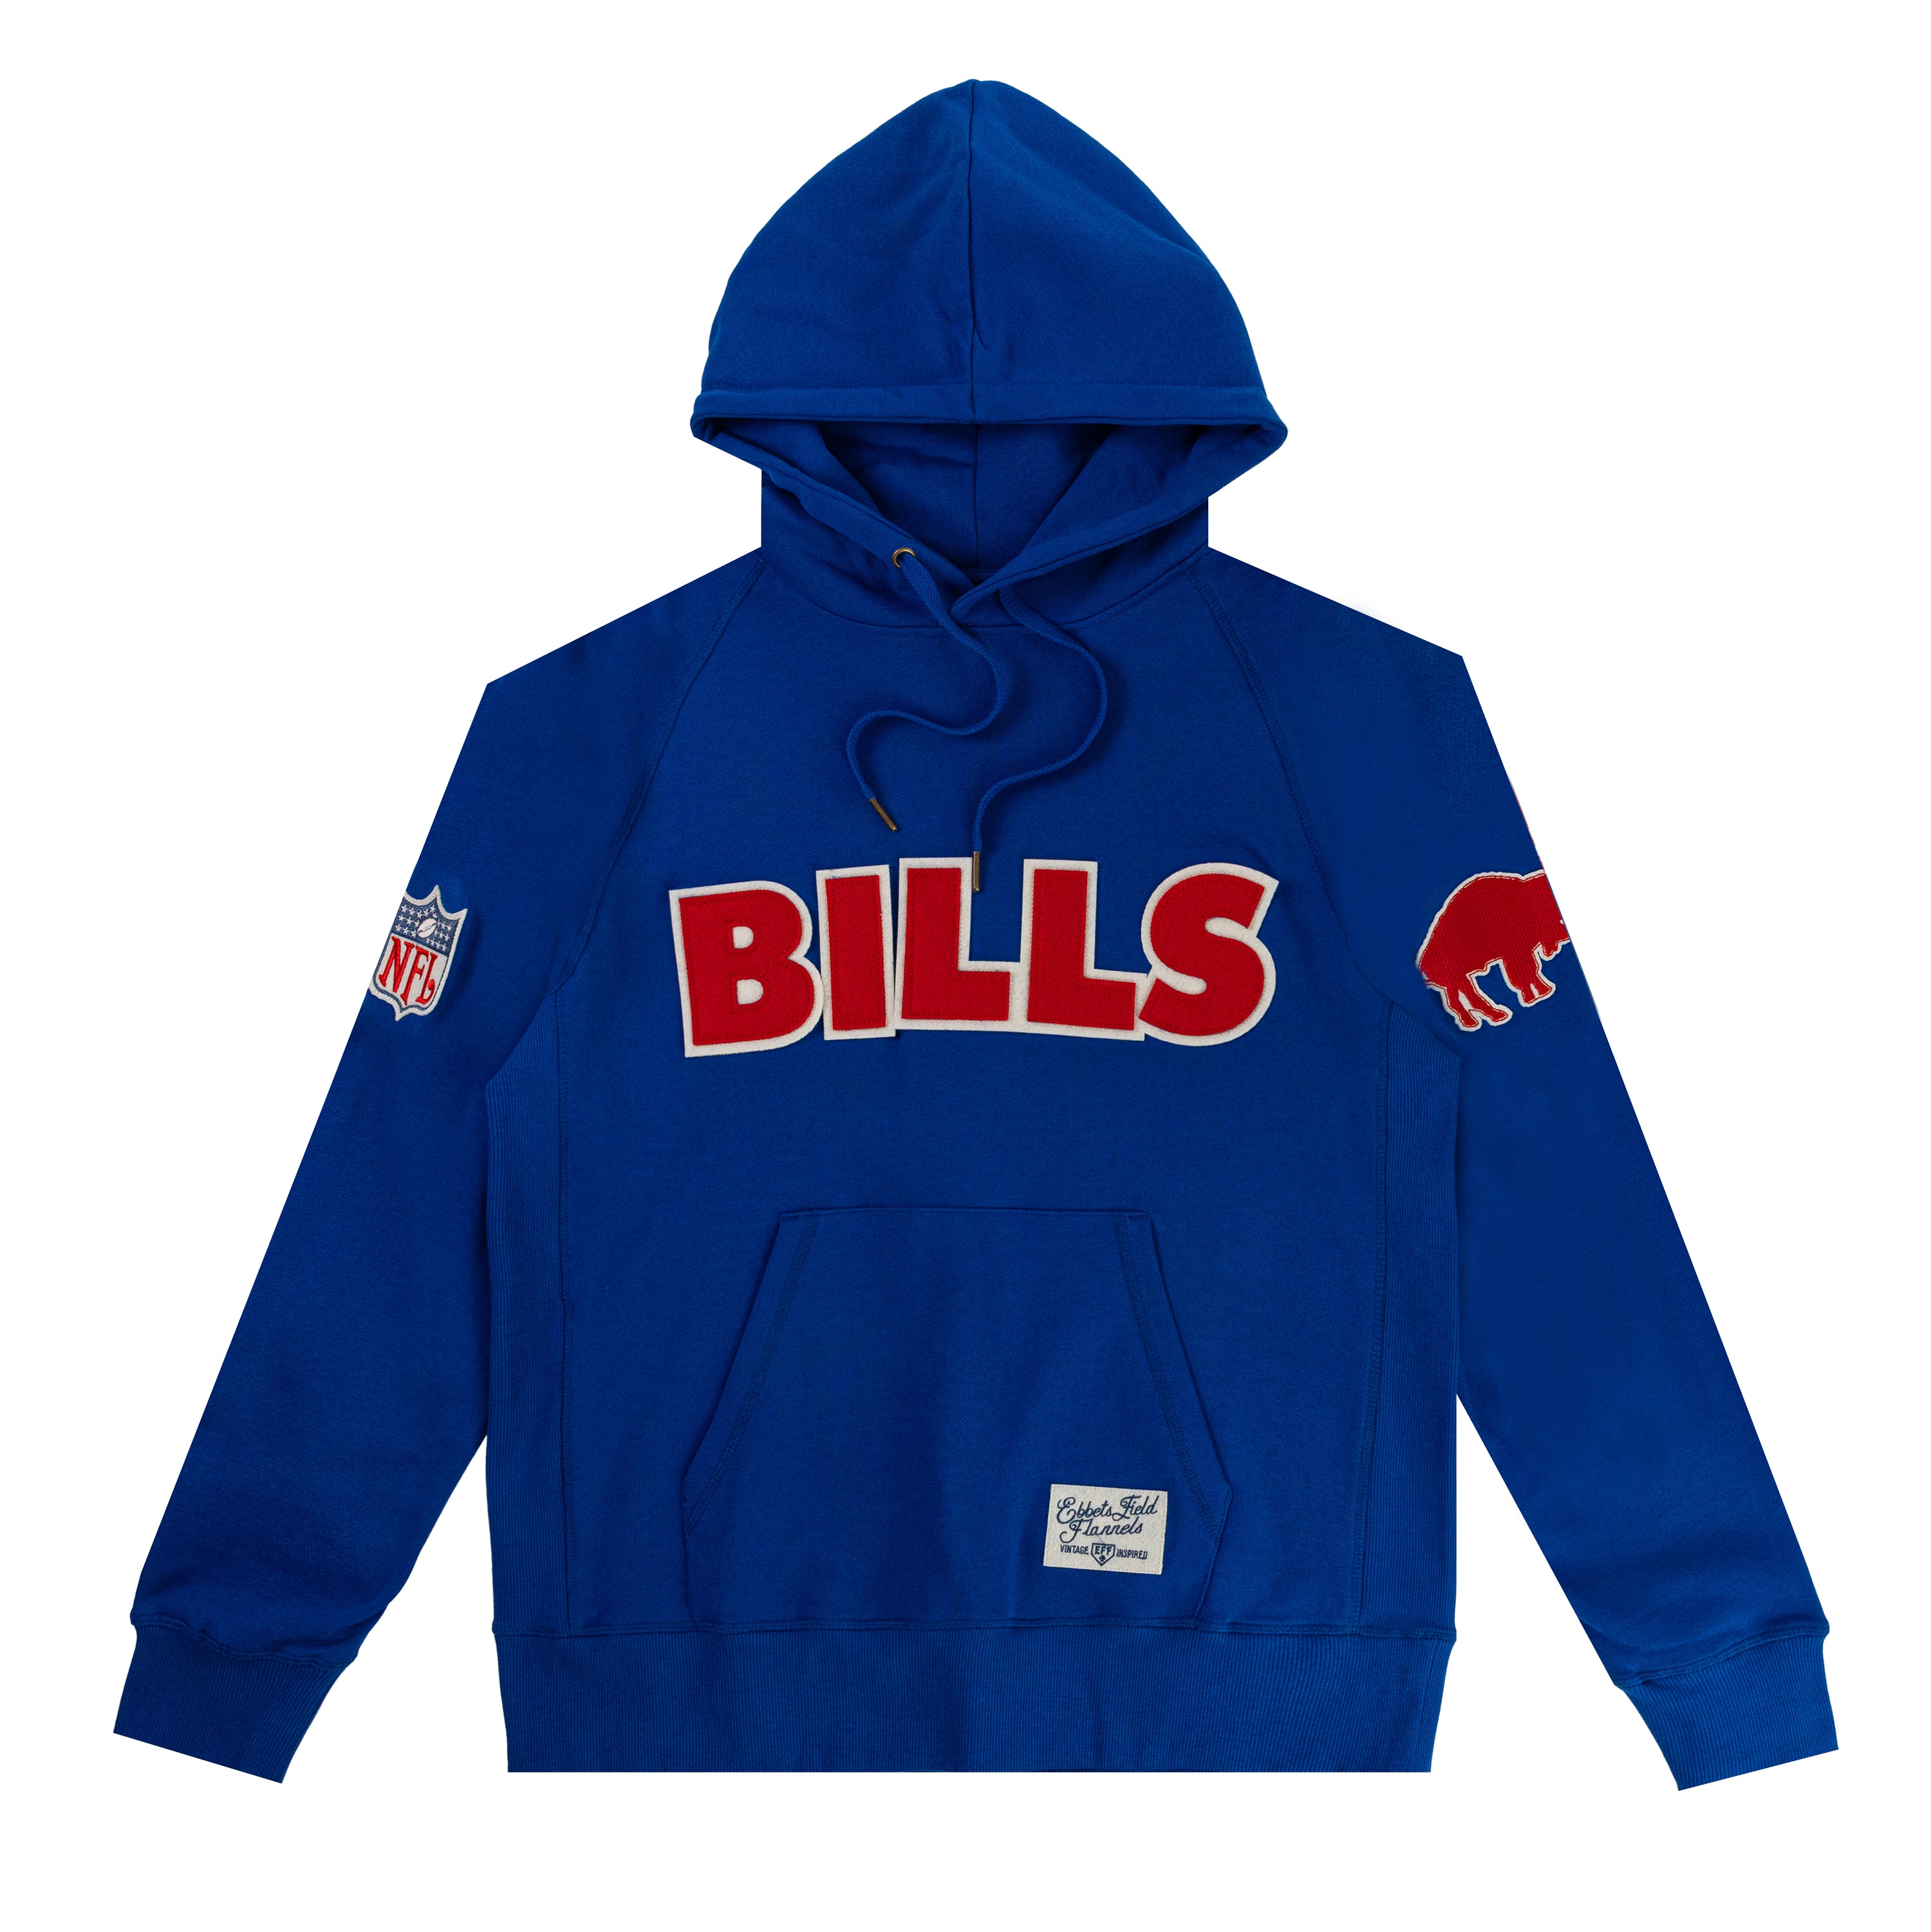 Buffalo Bills Football Vintage Sports Patches for sale